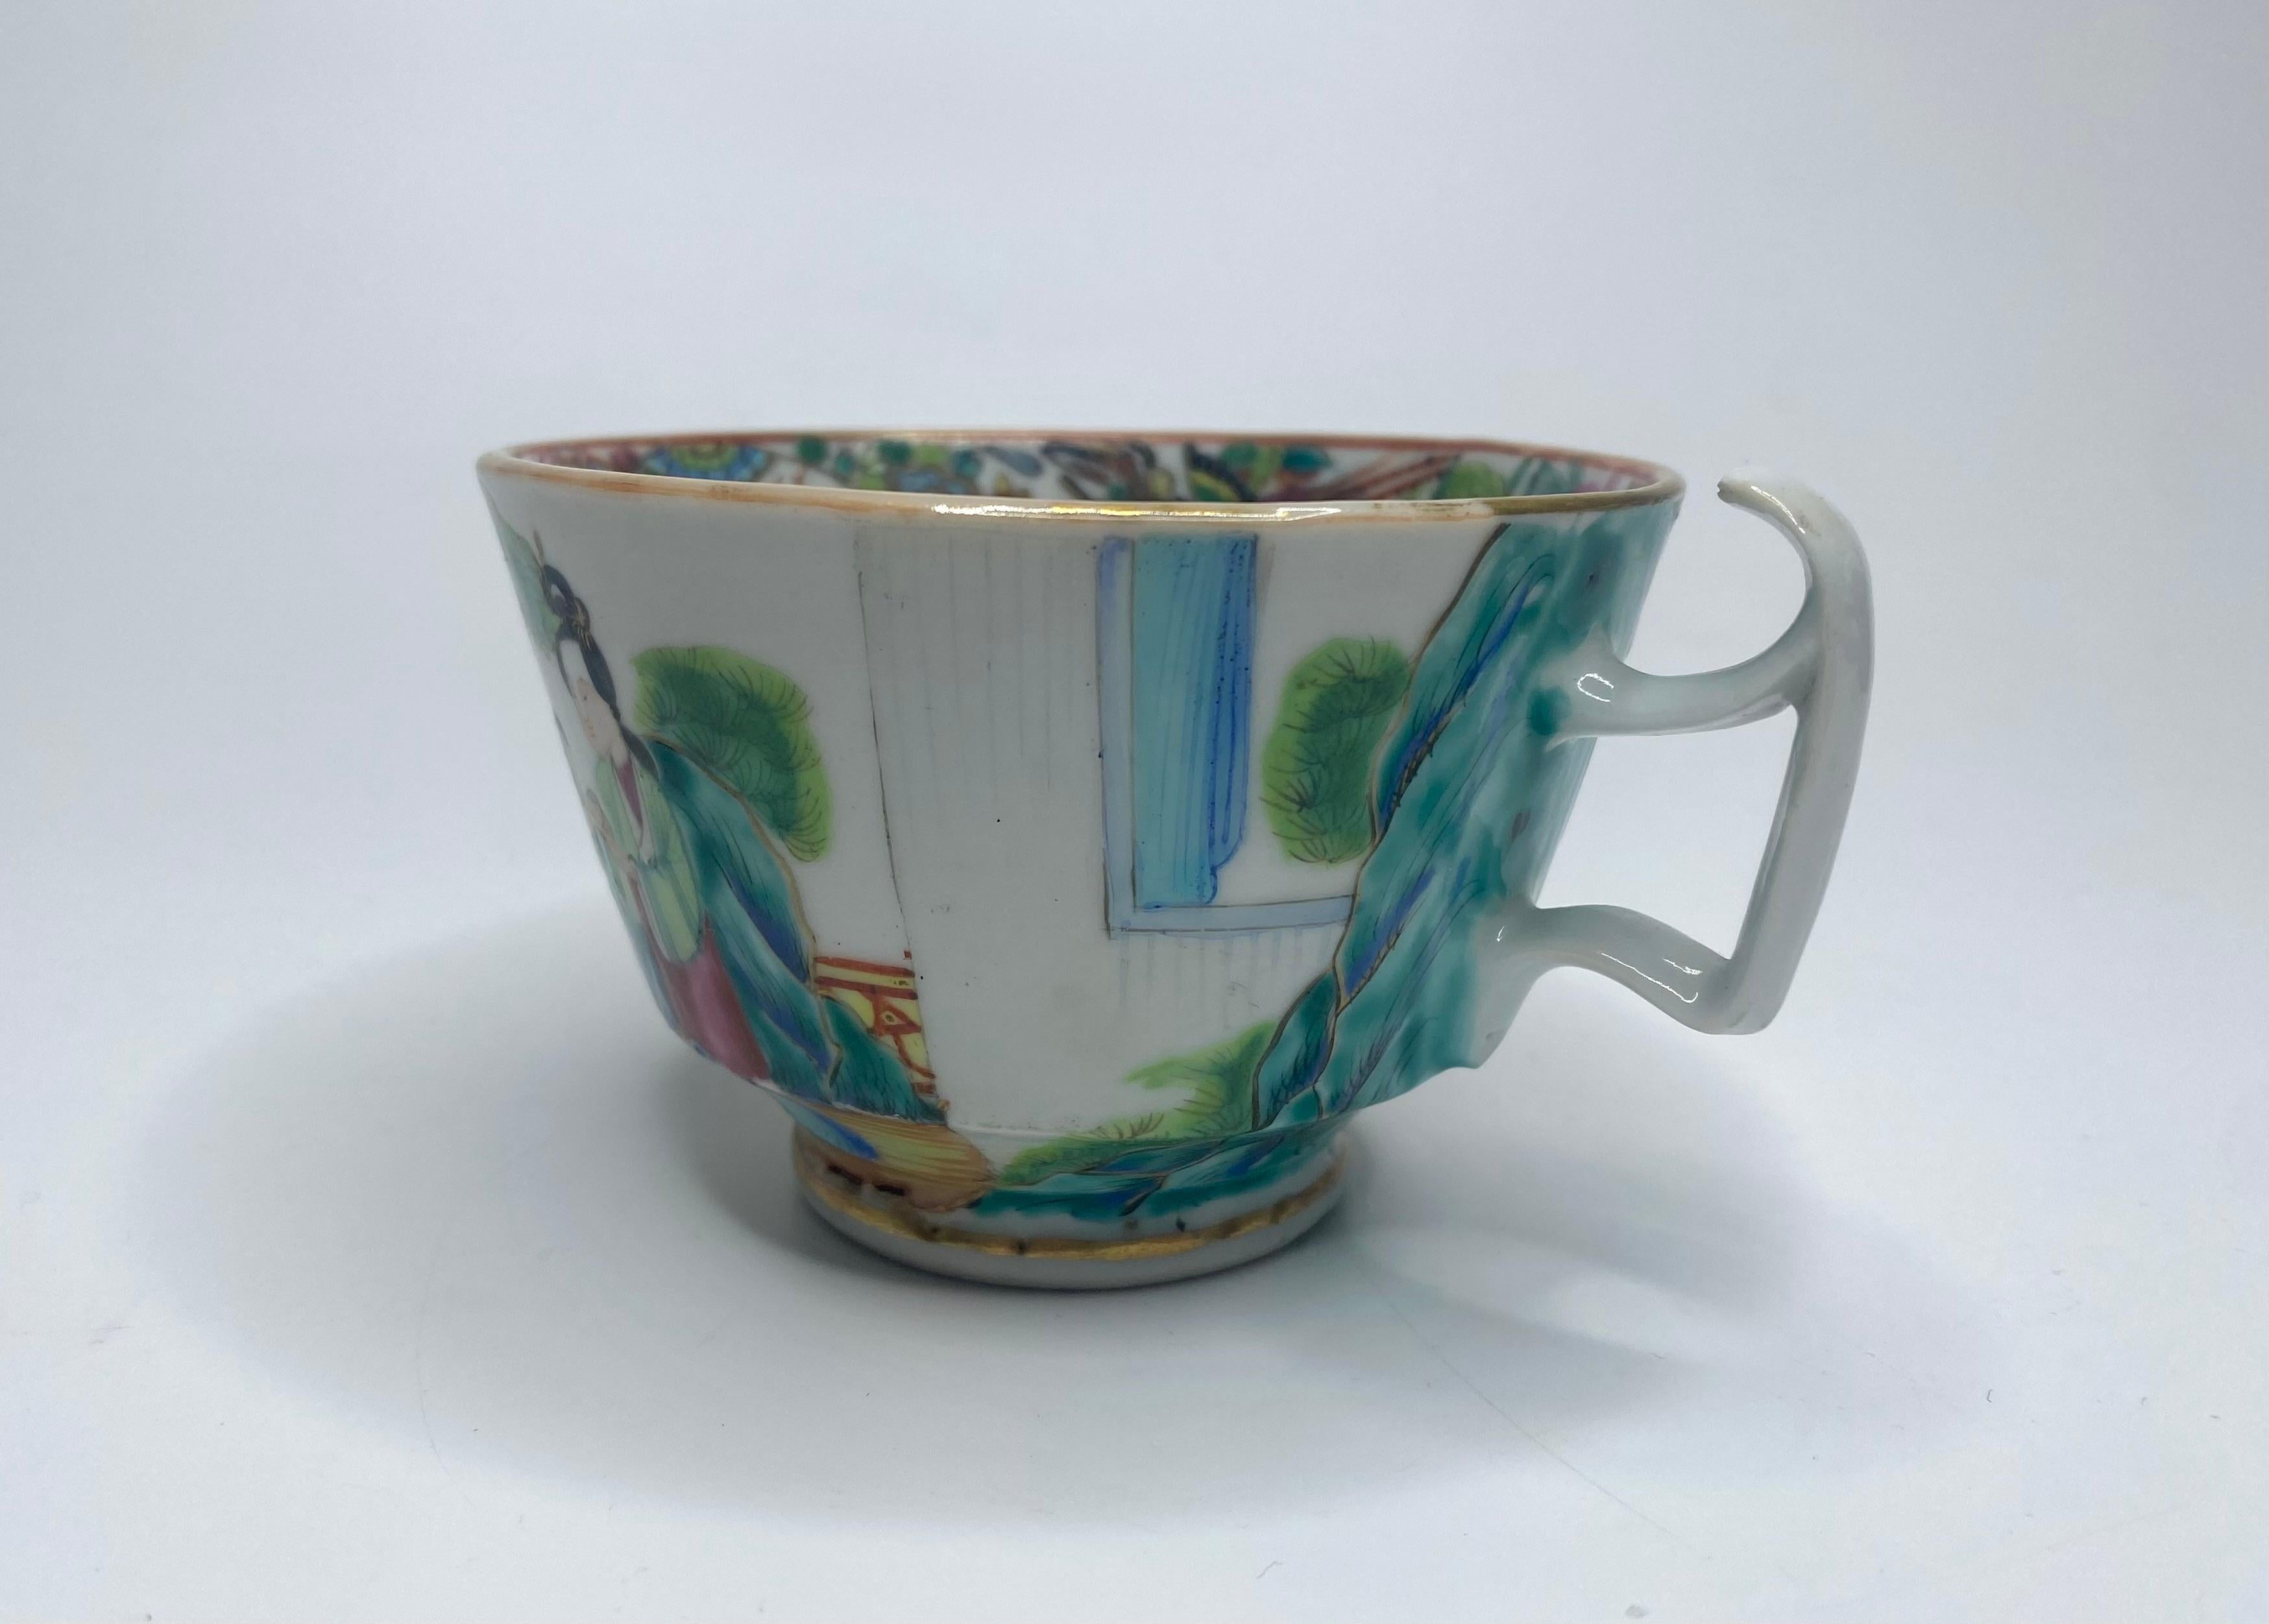 Chinese Canton porcelain cup & saucer, c. 1850. Qing dynasty. 3